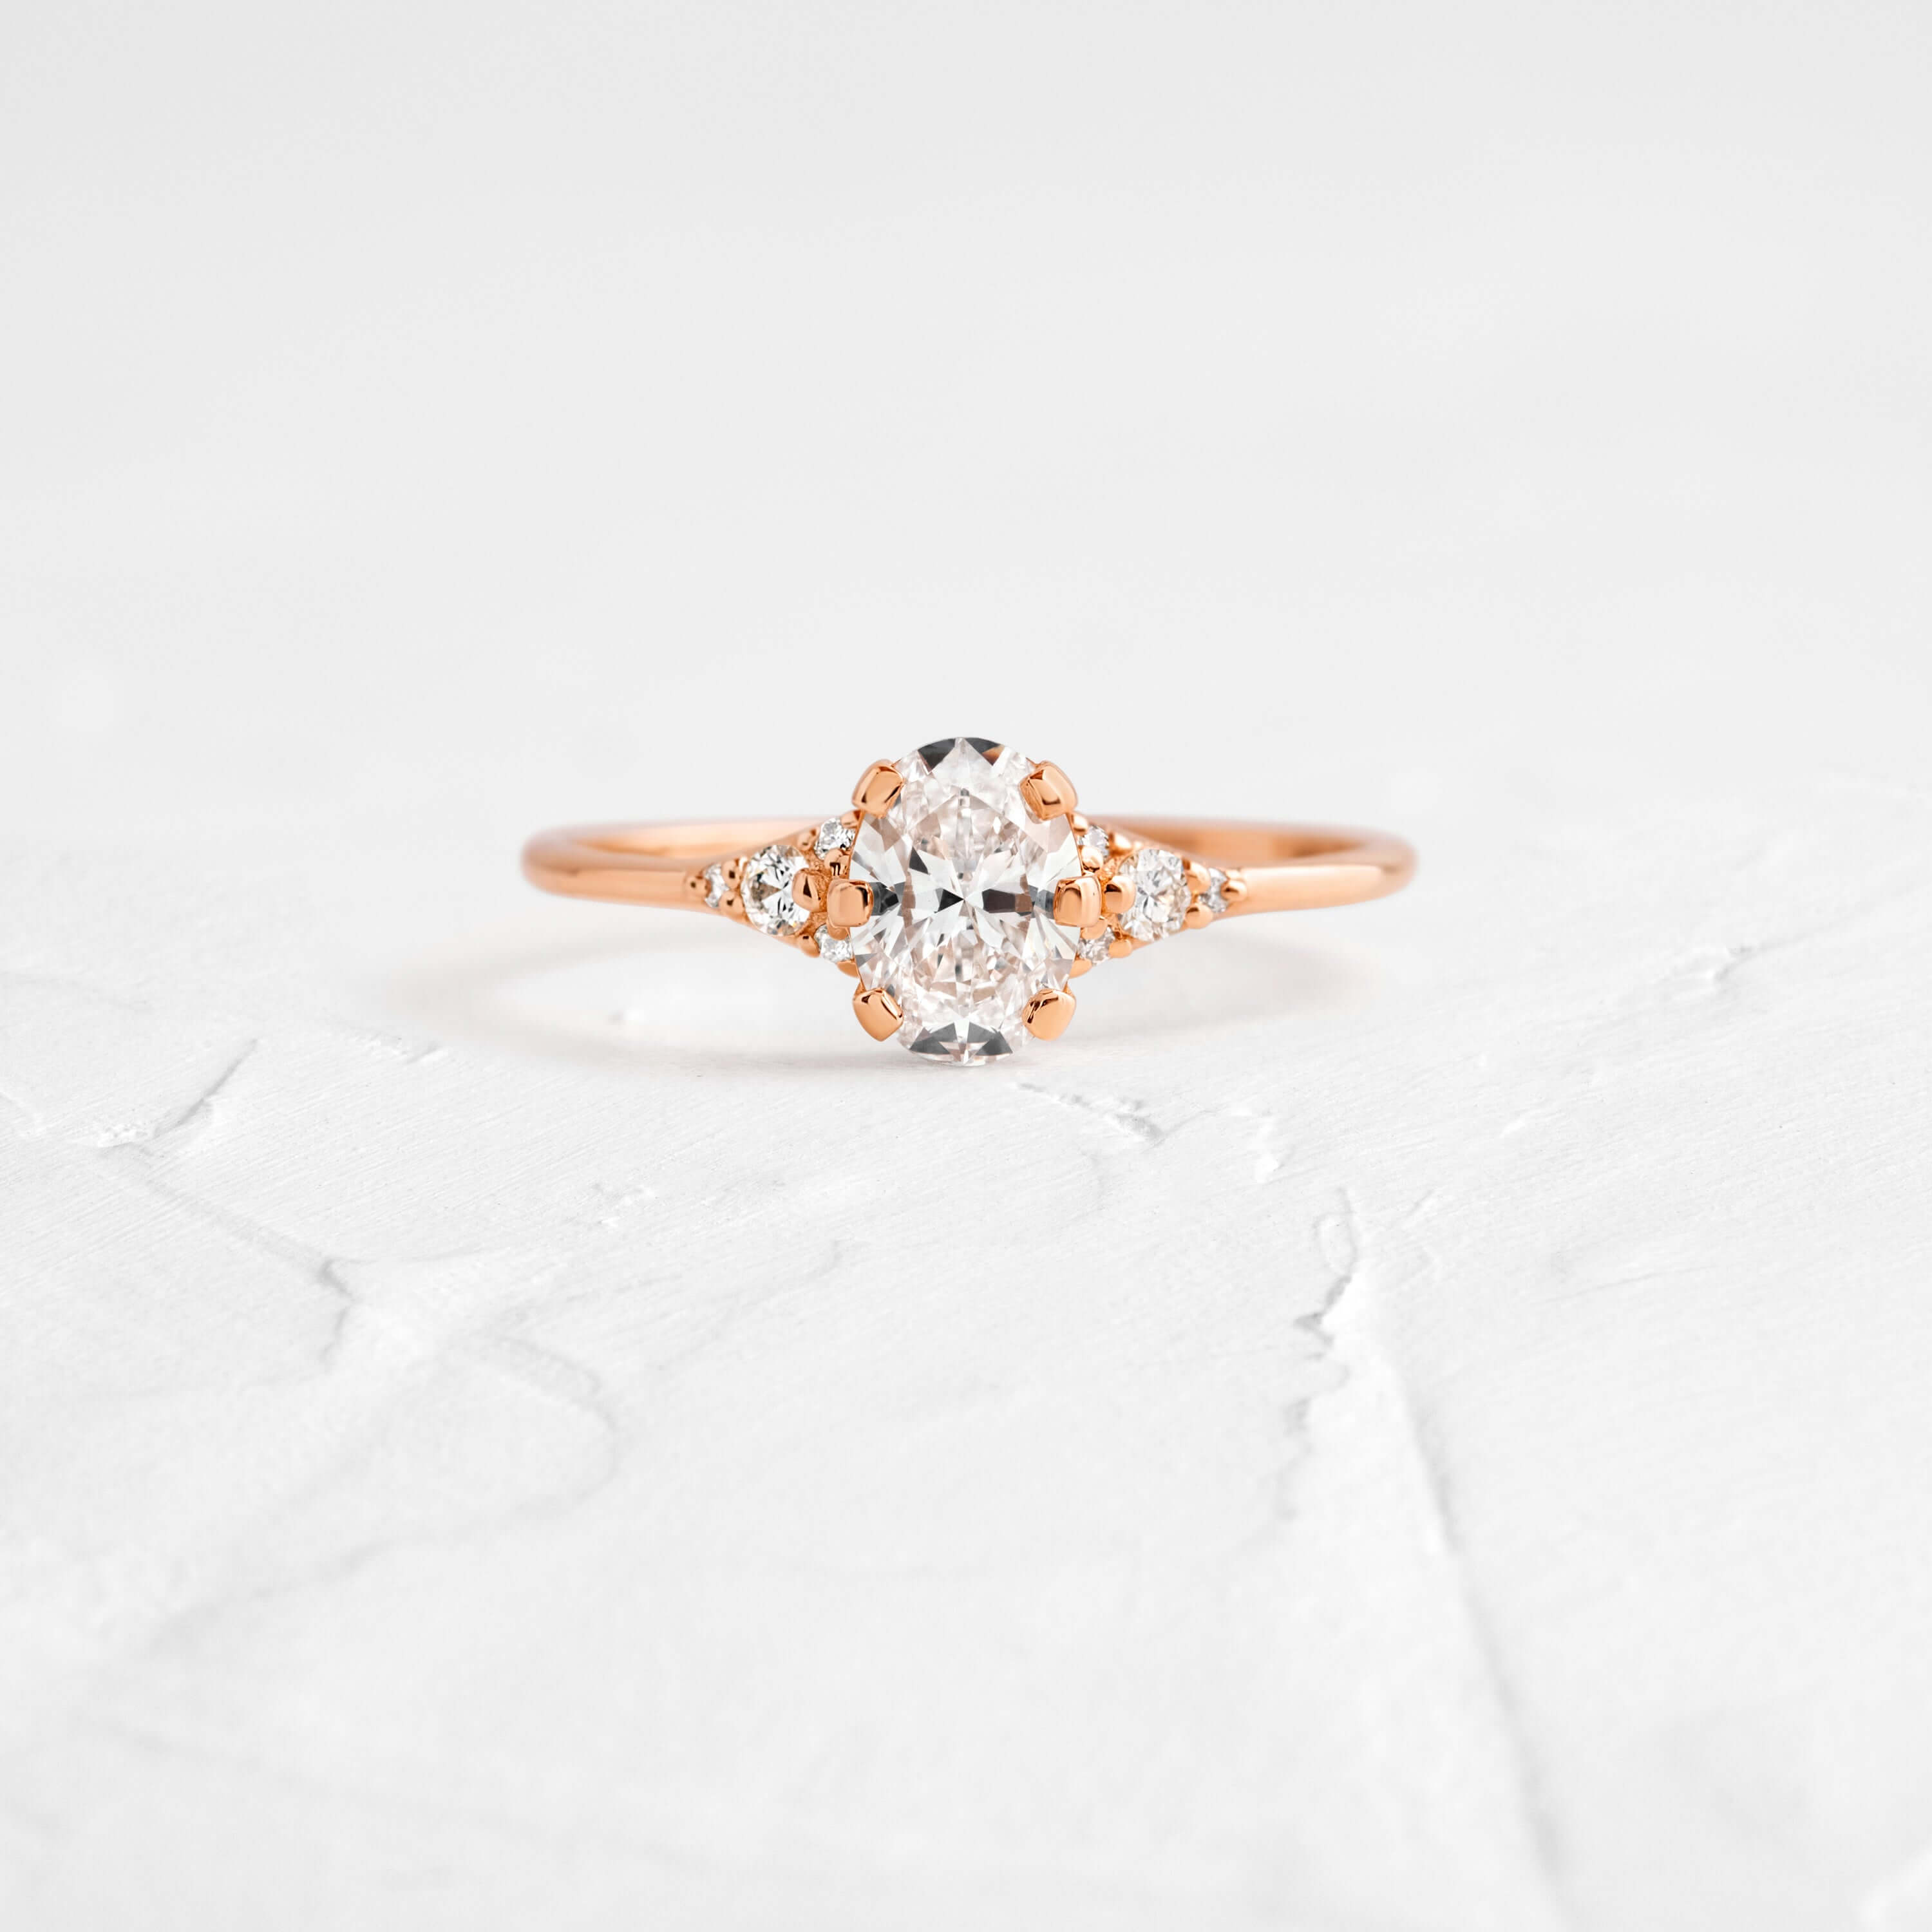 Oval Lady's Slipper Ring | Engagement Ring from Melanie Casey